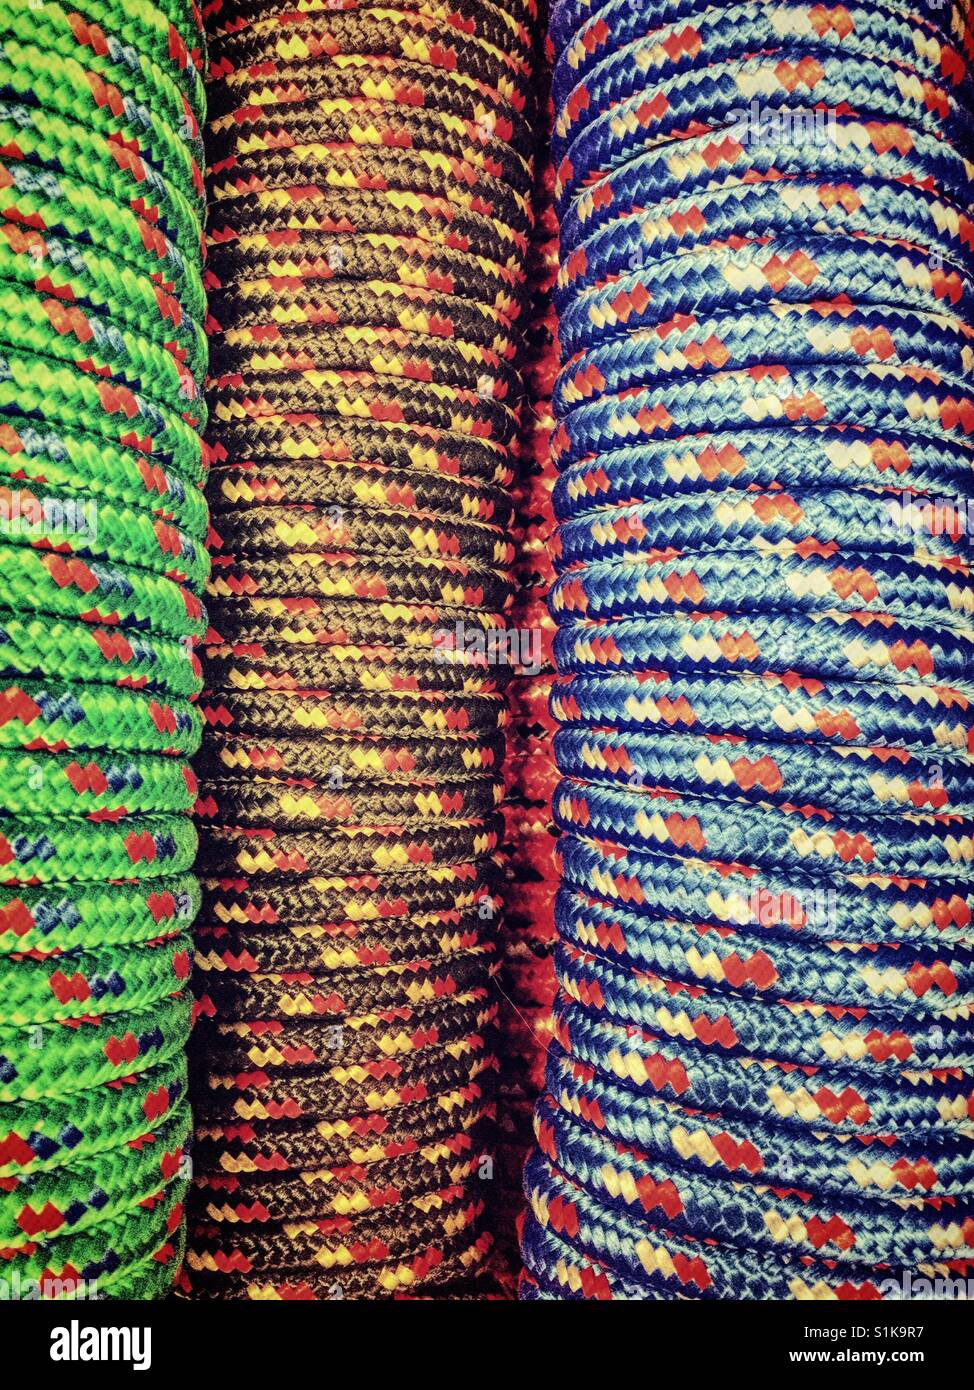 https://c8.alamy.com/comp/S1K9R7/coils-of-colorful-rope-in-display-at-home-depot-usa-S1K9R7.jpg